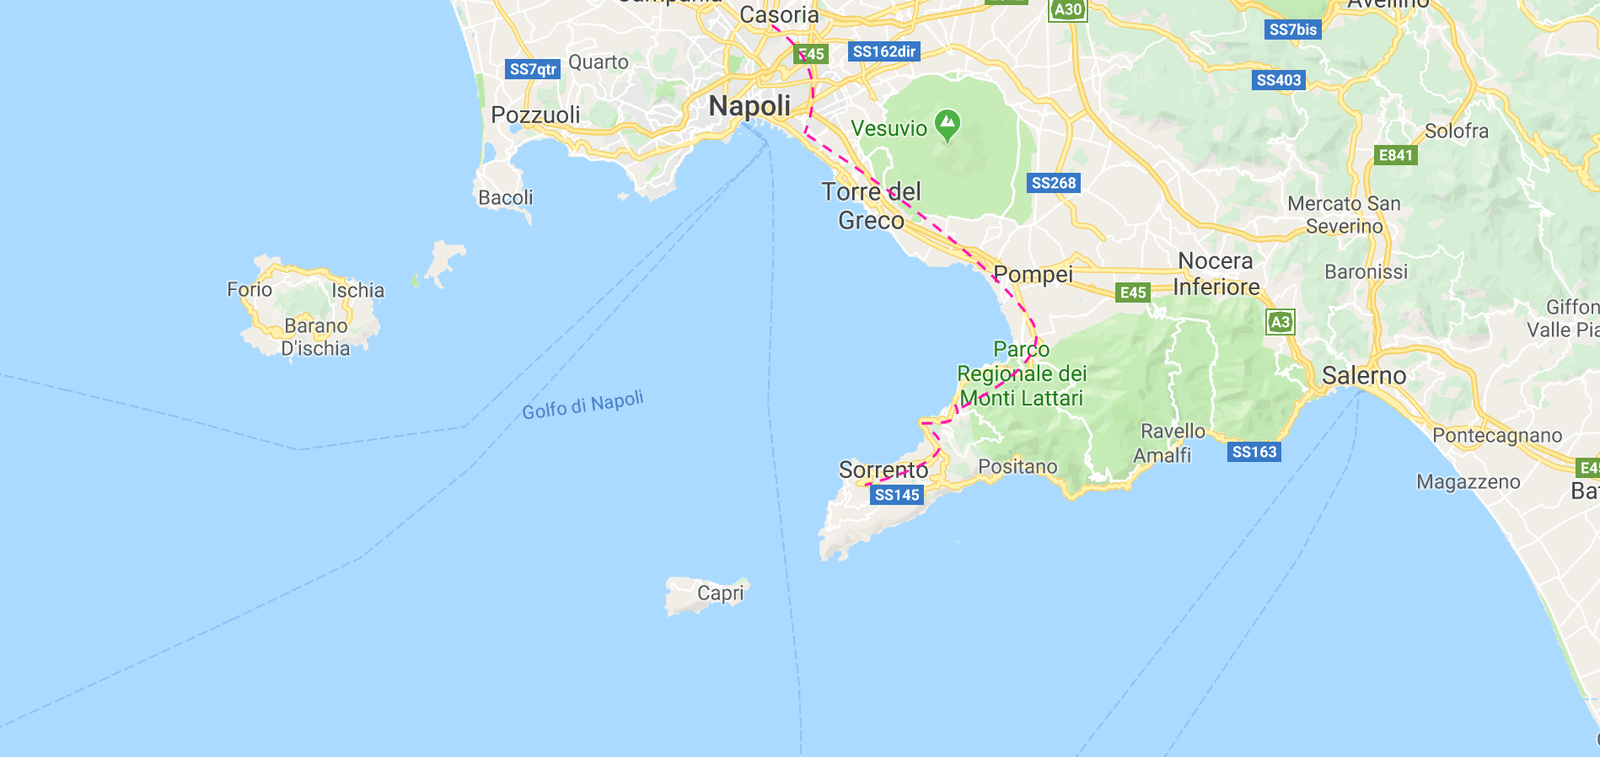 NAPLES TO SORRENTO BY BUS 